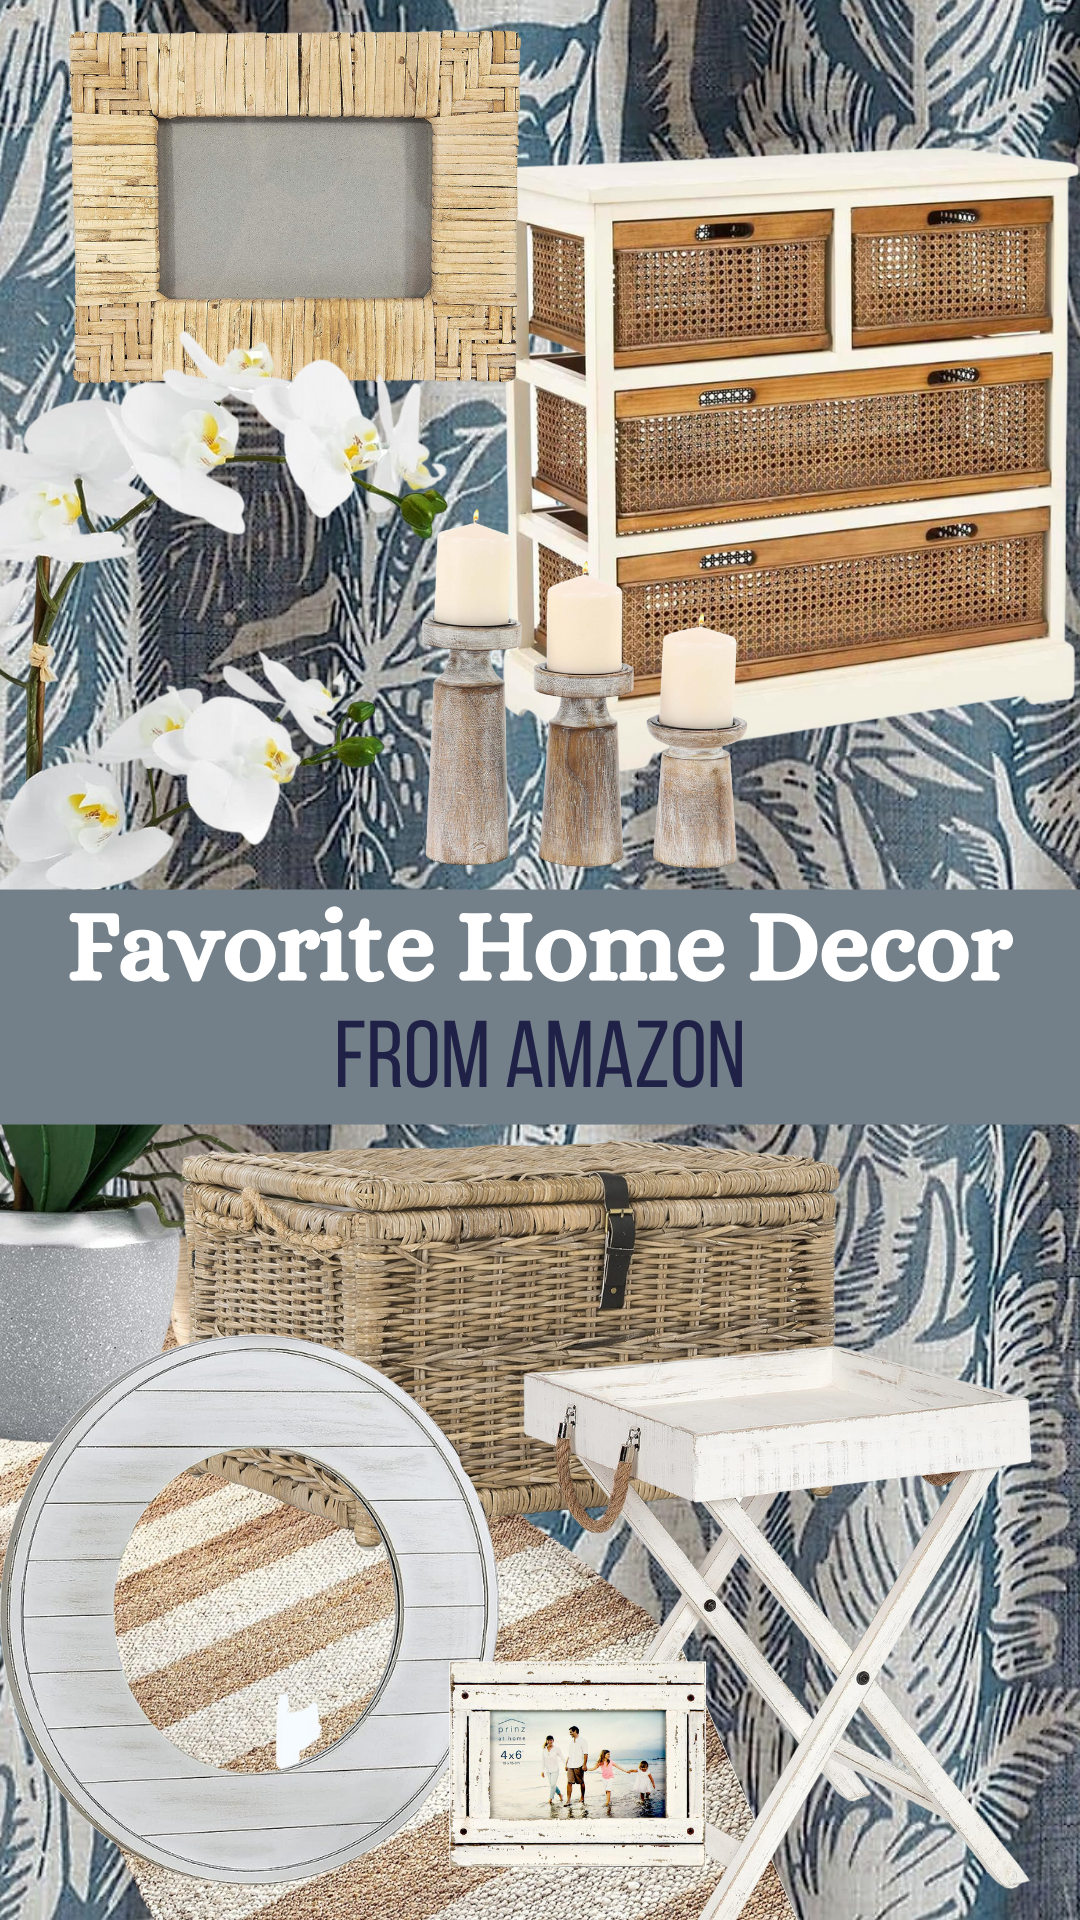 Favorite Home Decor from Amazon